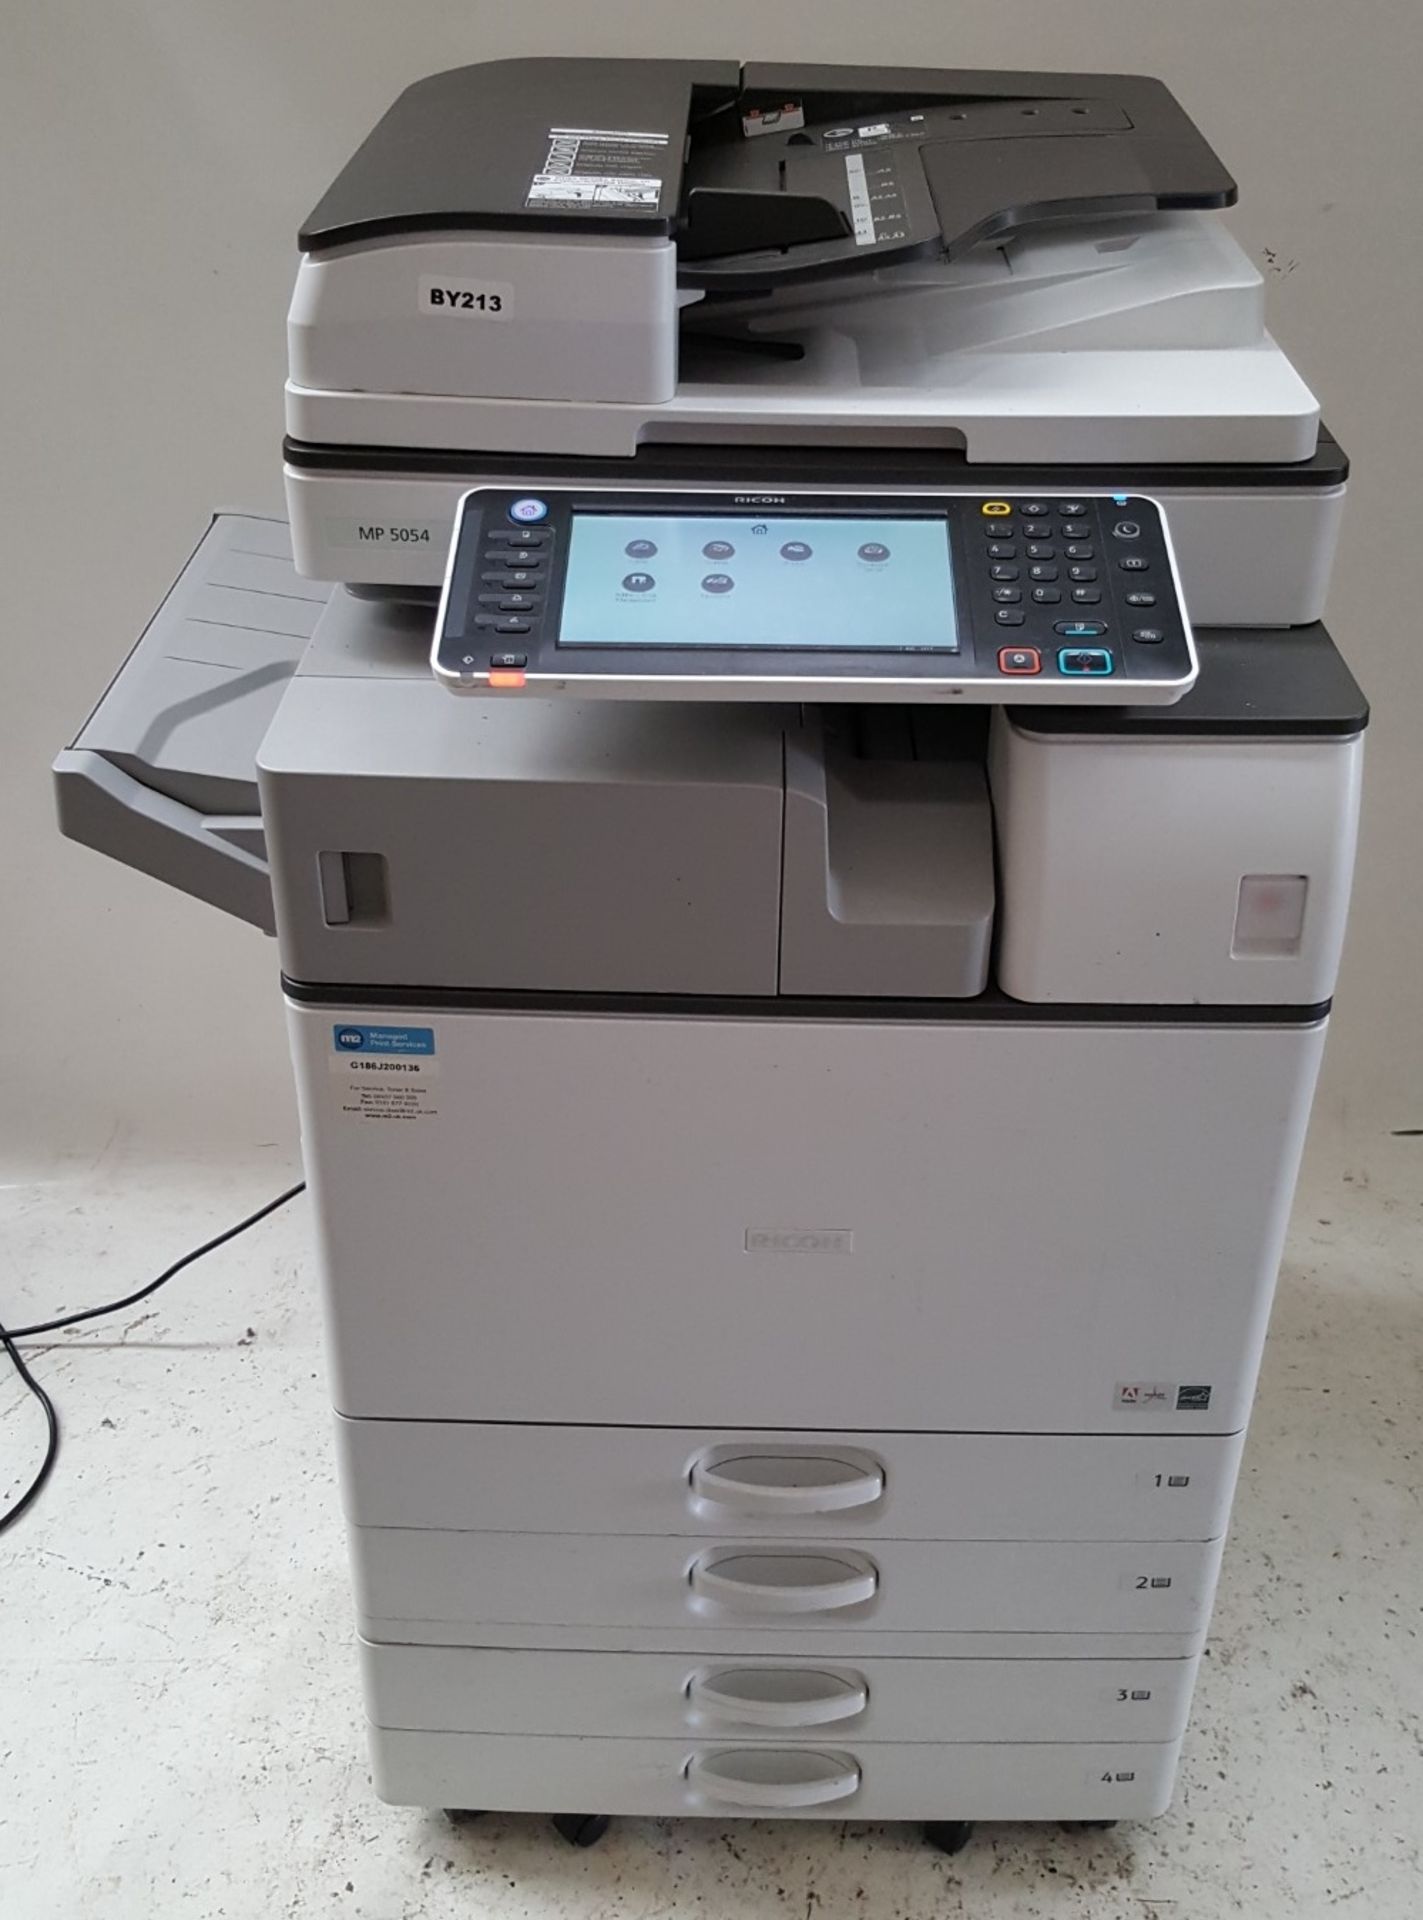 1 x RICOH MP 5054 Black and White Laser Multifunction Office Printer - Ref BY213 - Image 2 of 5